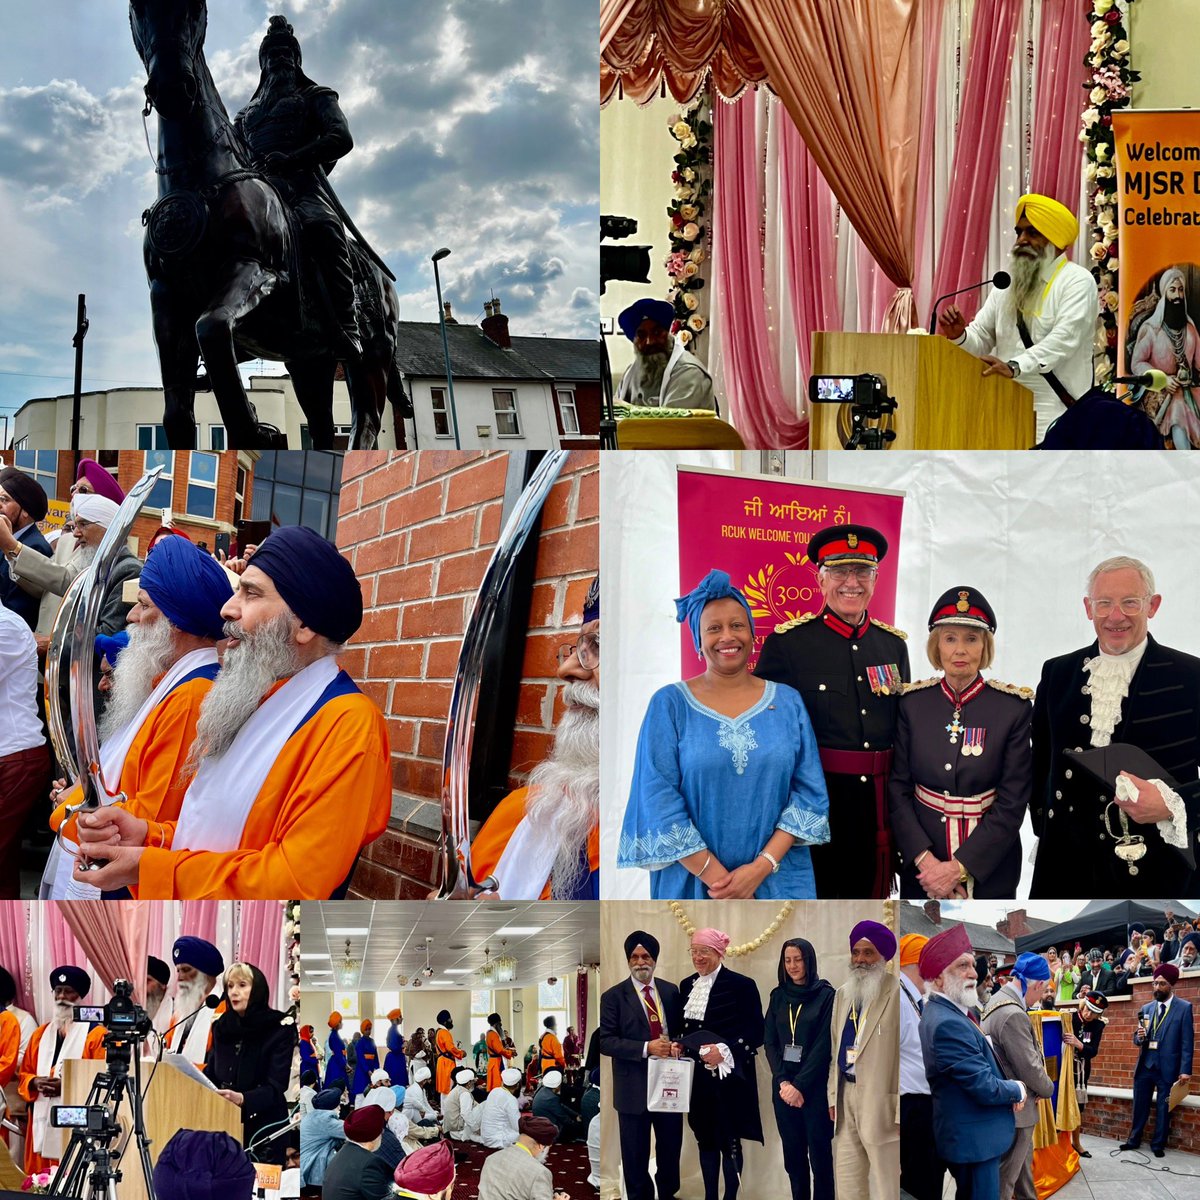 Felt very privileged today to support HM Lord Lieutenant of Derbyshire unveil the Maharaja Jassa Singh Ramgarhia Memorial Statue and Gate at Ramgarhia Gurdwara Derby Couldn’t have been made more welcome by everyone at the Gurdwara. @LLDerbyshire